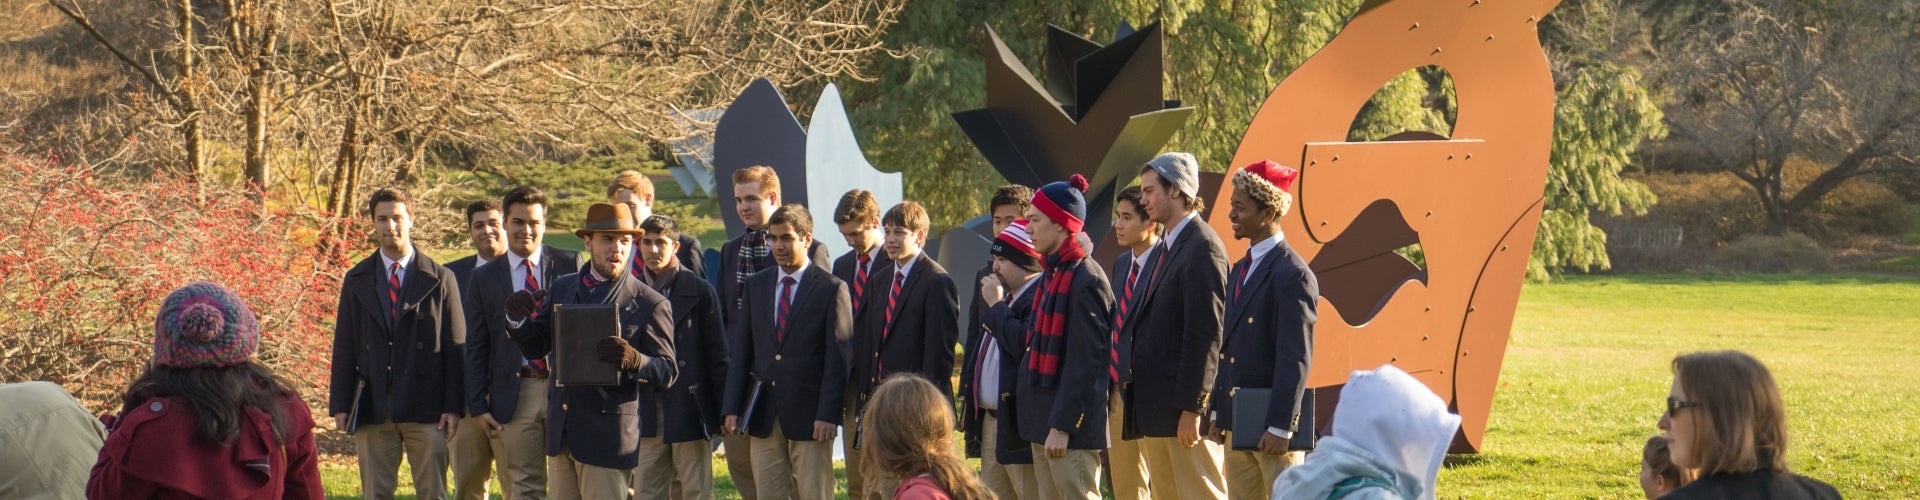 A glee club stands outside preparing to sing. 